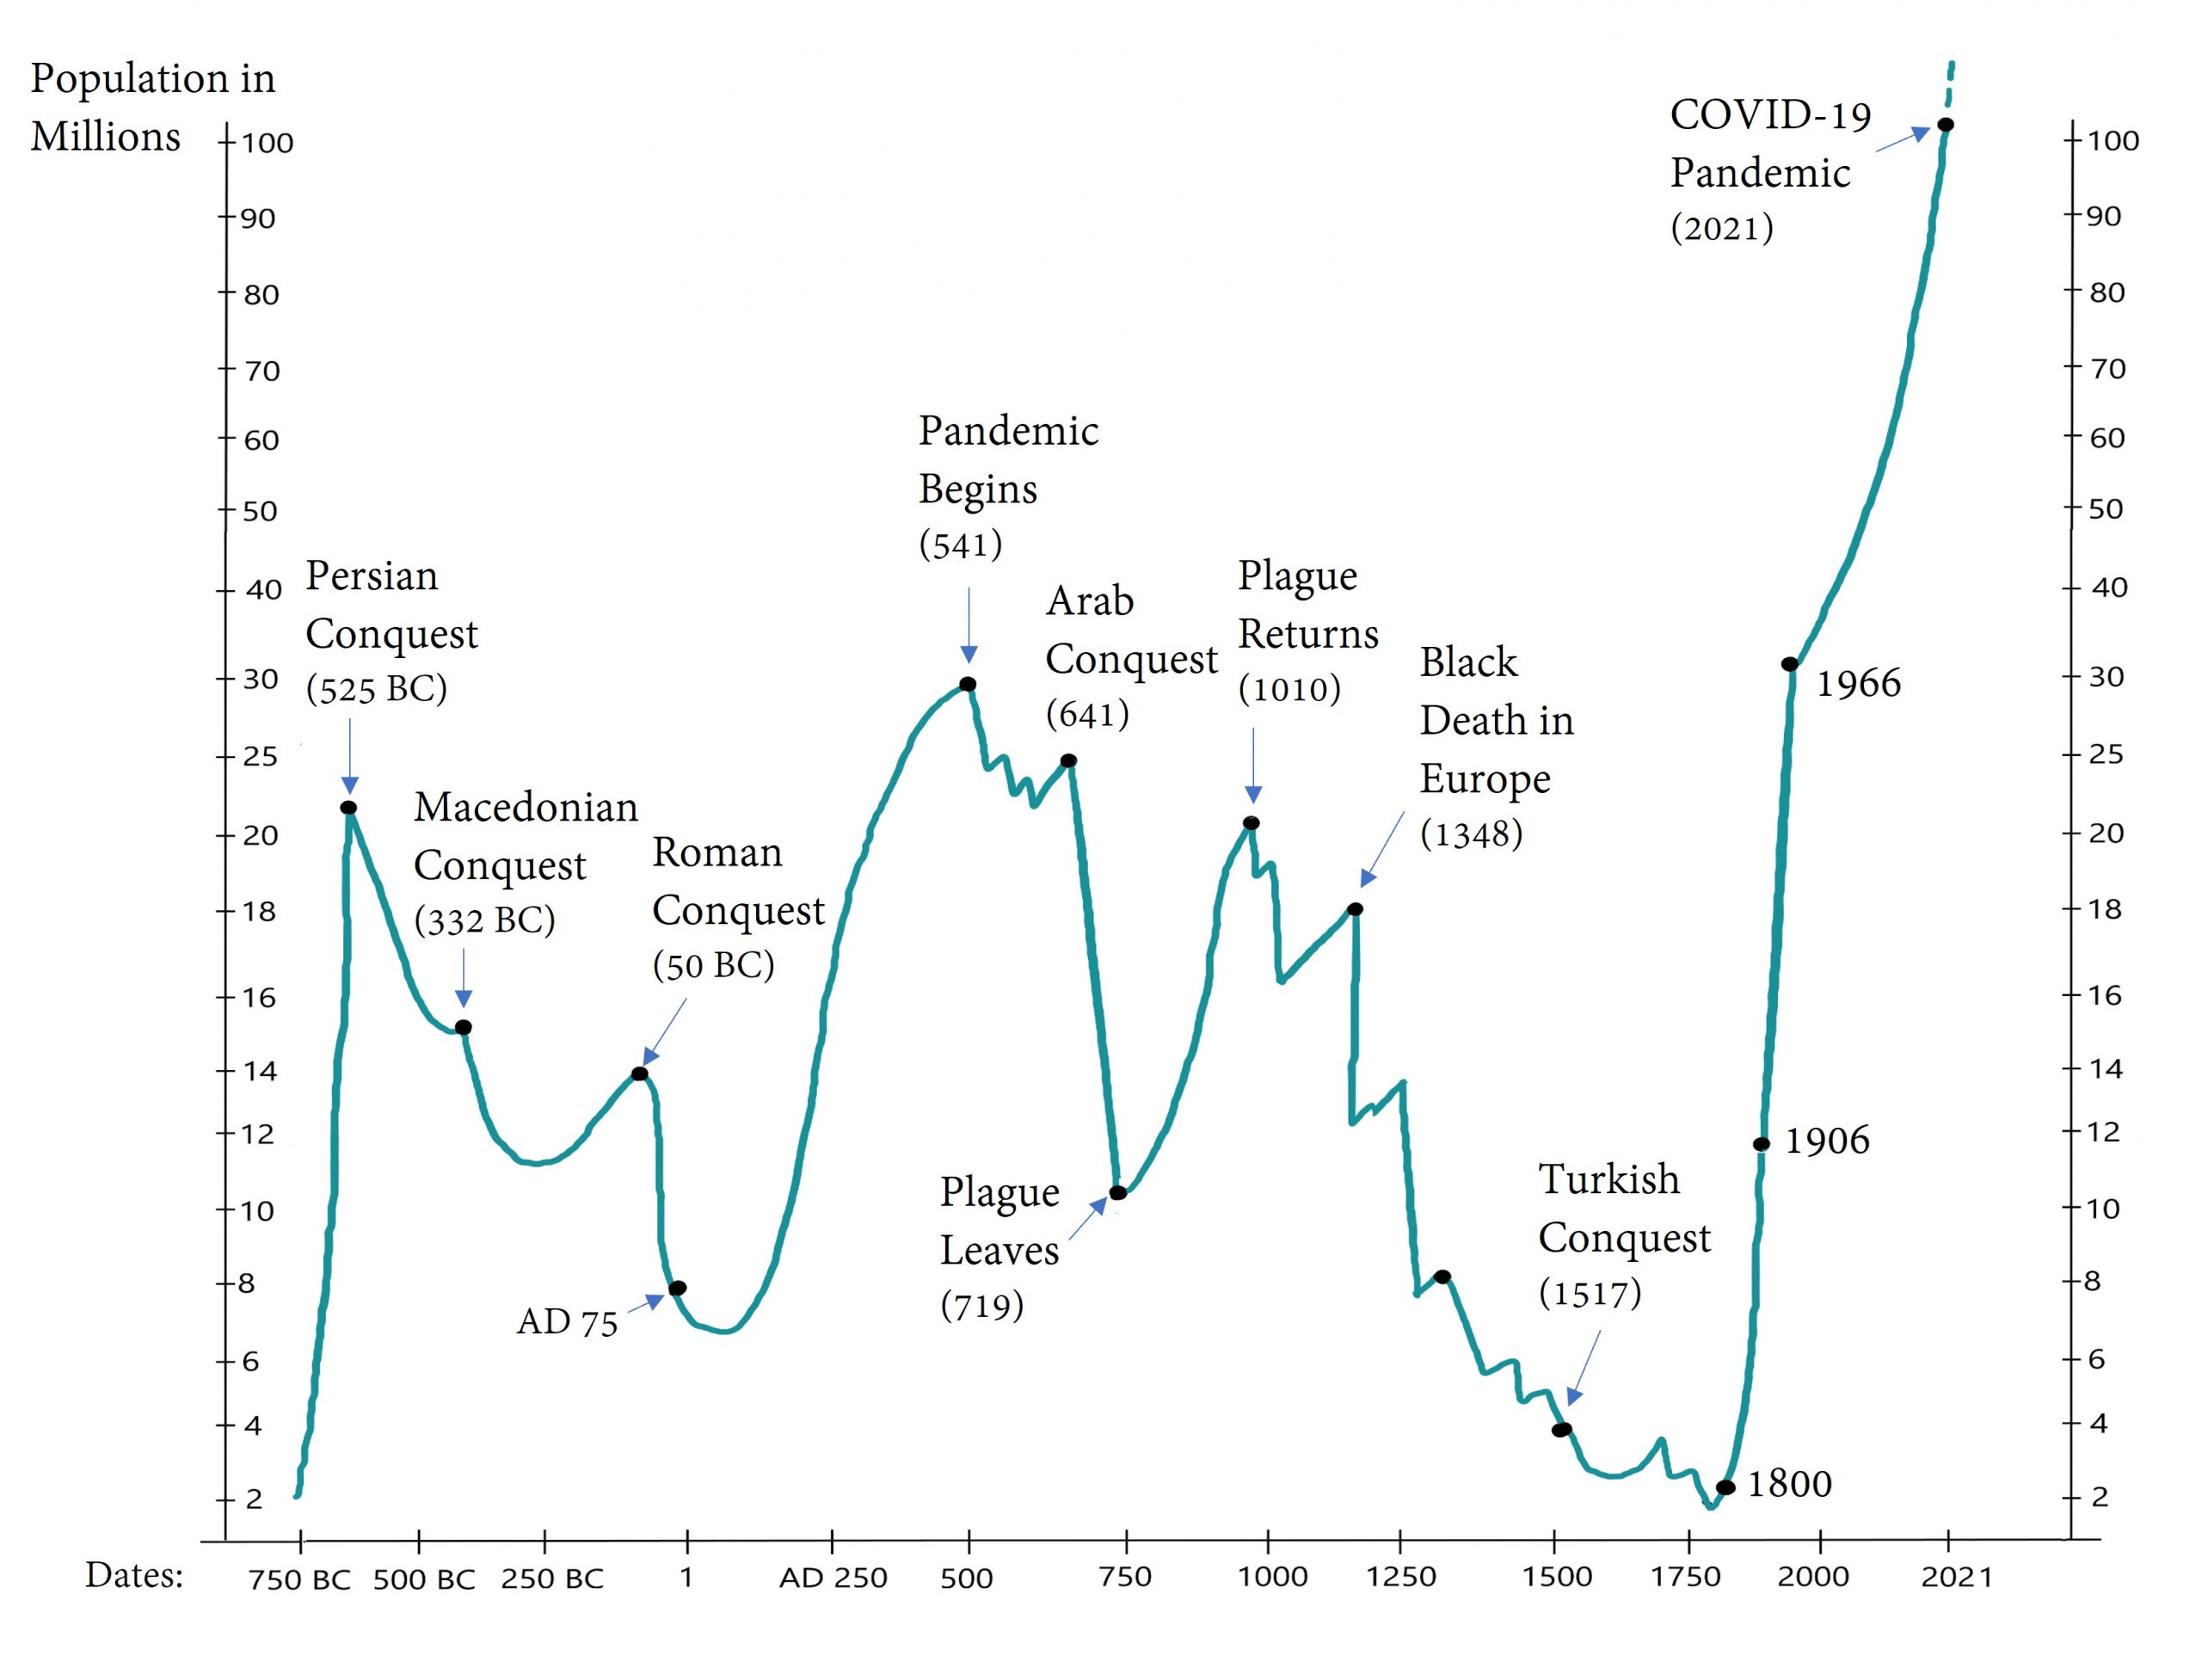 This diagram shows the estimated population of Eygpt from 750 BC to 2021 AD. Wars and pandemics were major setbacks. The population trended down after the Bubonic Plague returned in 1010 AD, not recovering until 1800, after which the population rose meteorically.